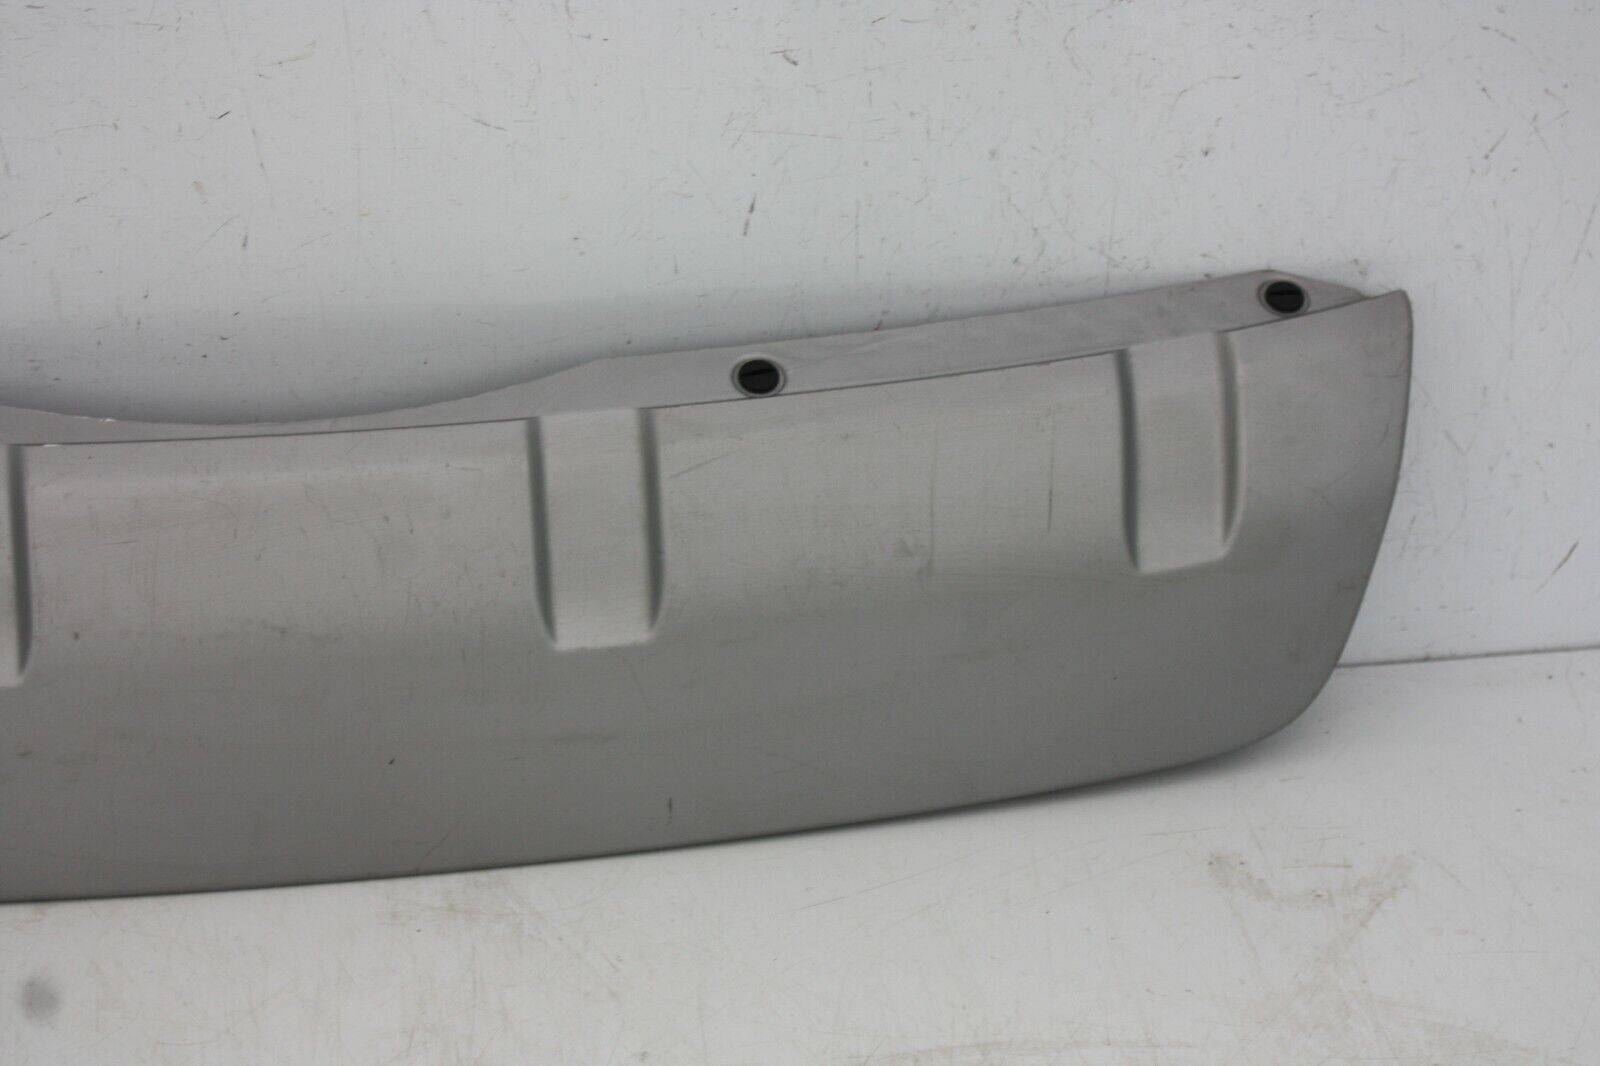 Land-Rover-Discovery-5-Rear-Bumper-Tow-Eye-Cover-2017-Onwards-Genuine-175367544144-3